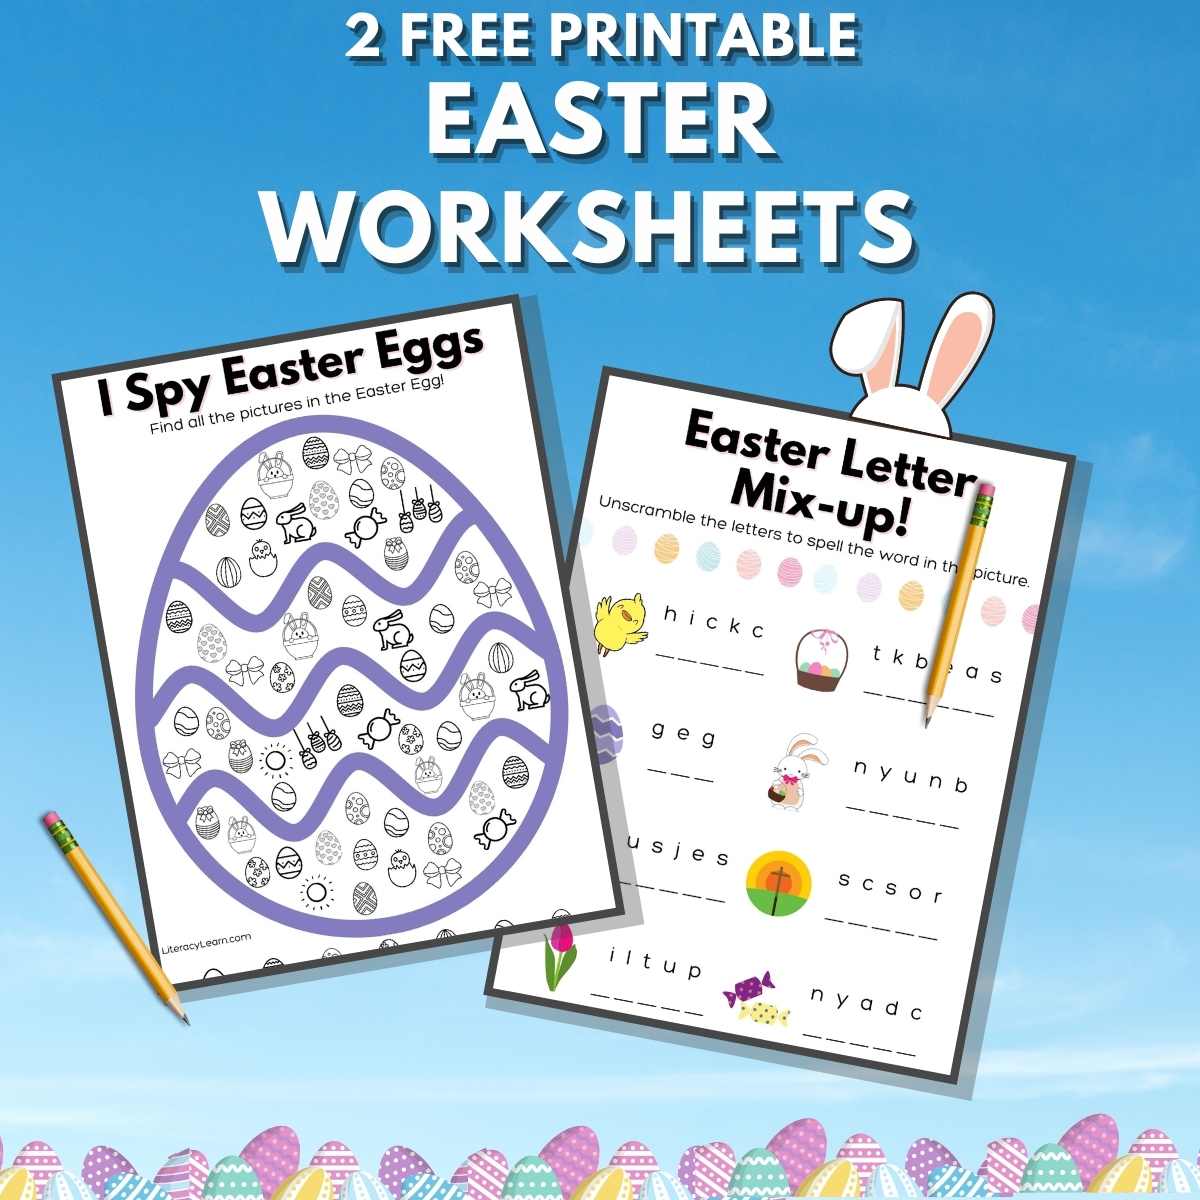 Pinterest graphic with the worksheets on a bright blue background and the words "2 Free Printable Easter Worksheets."